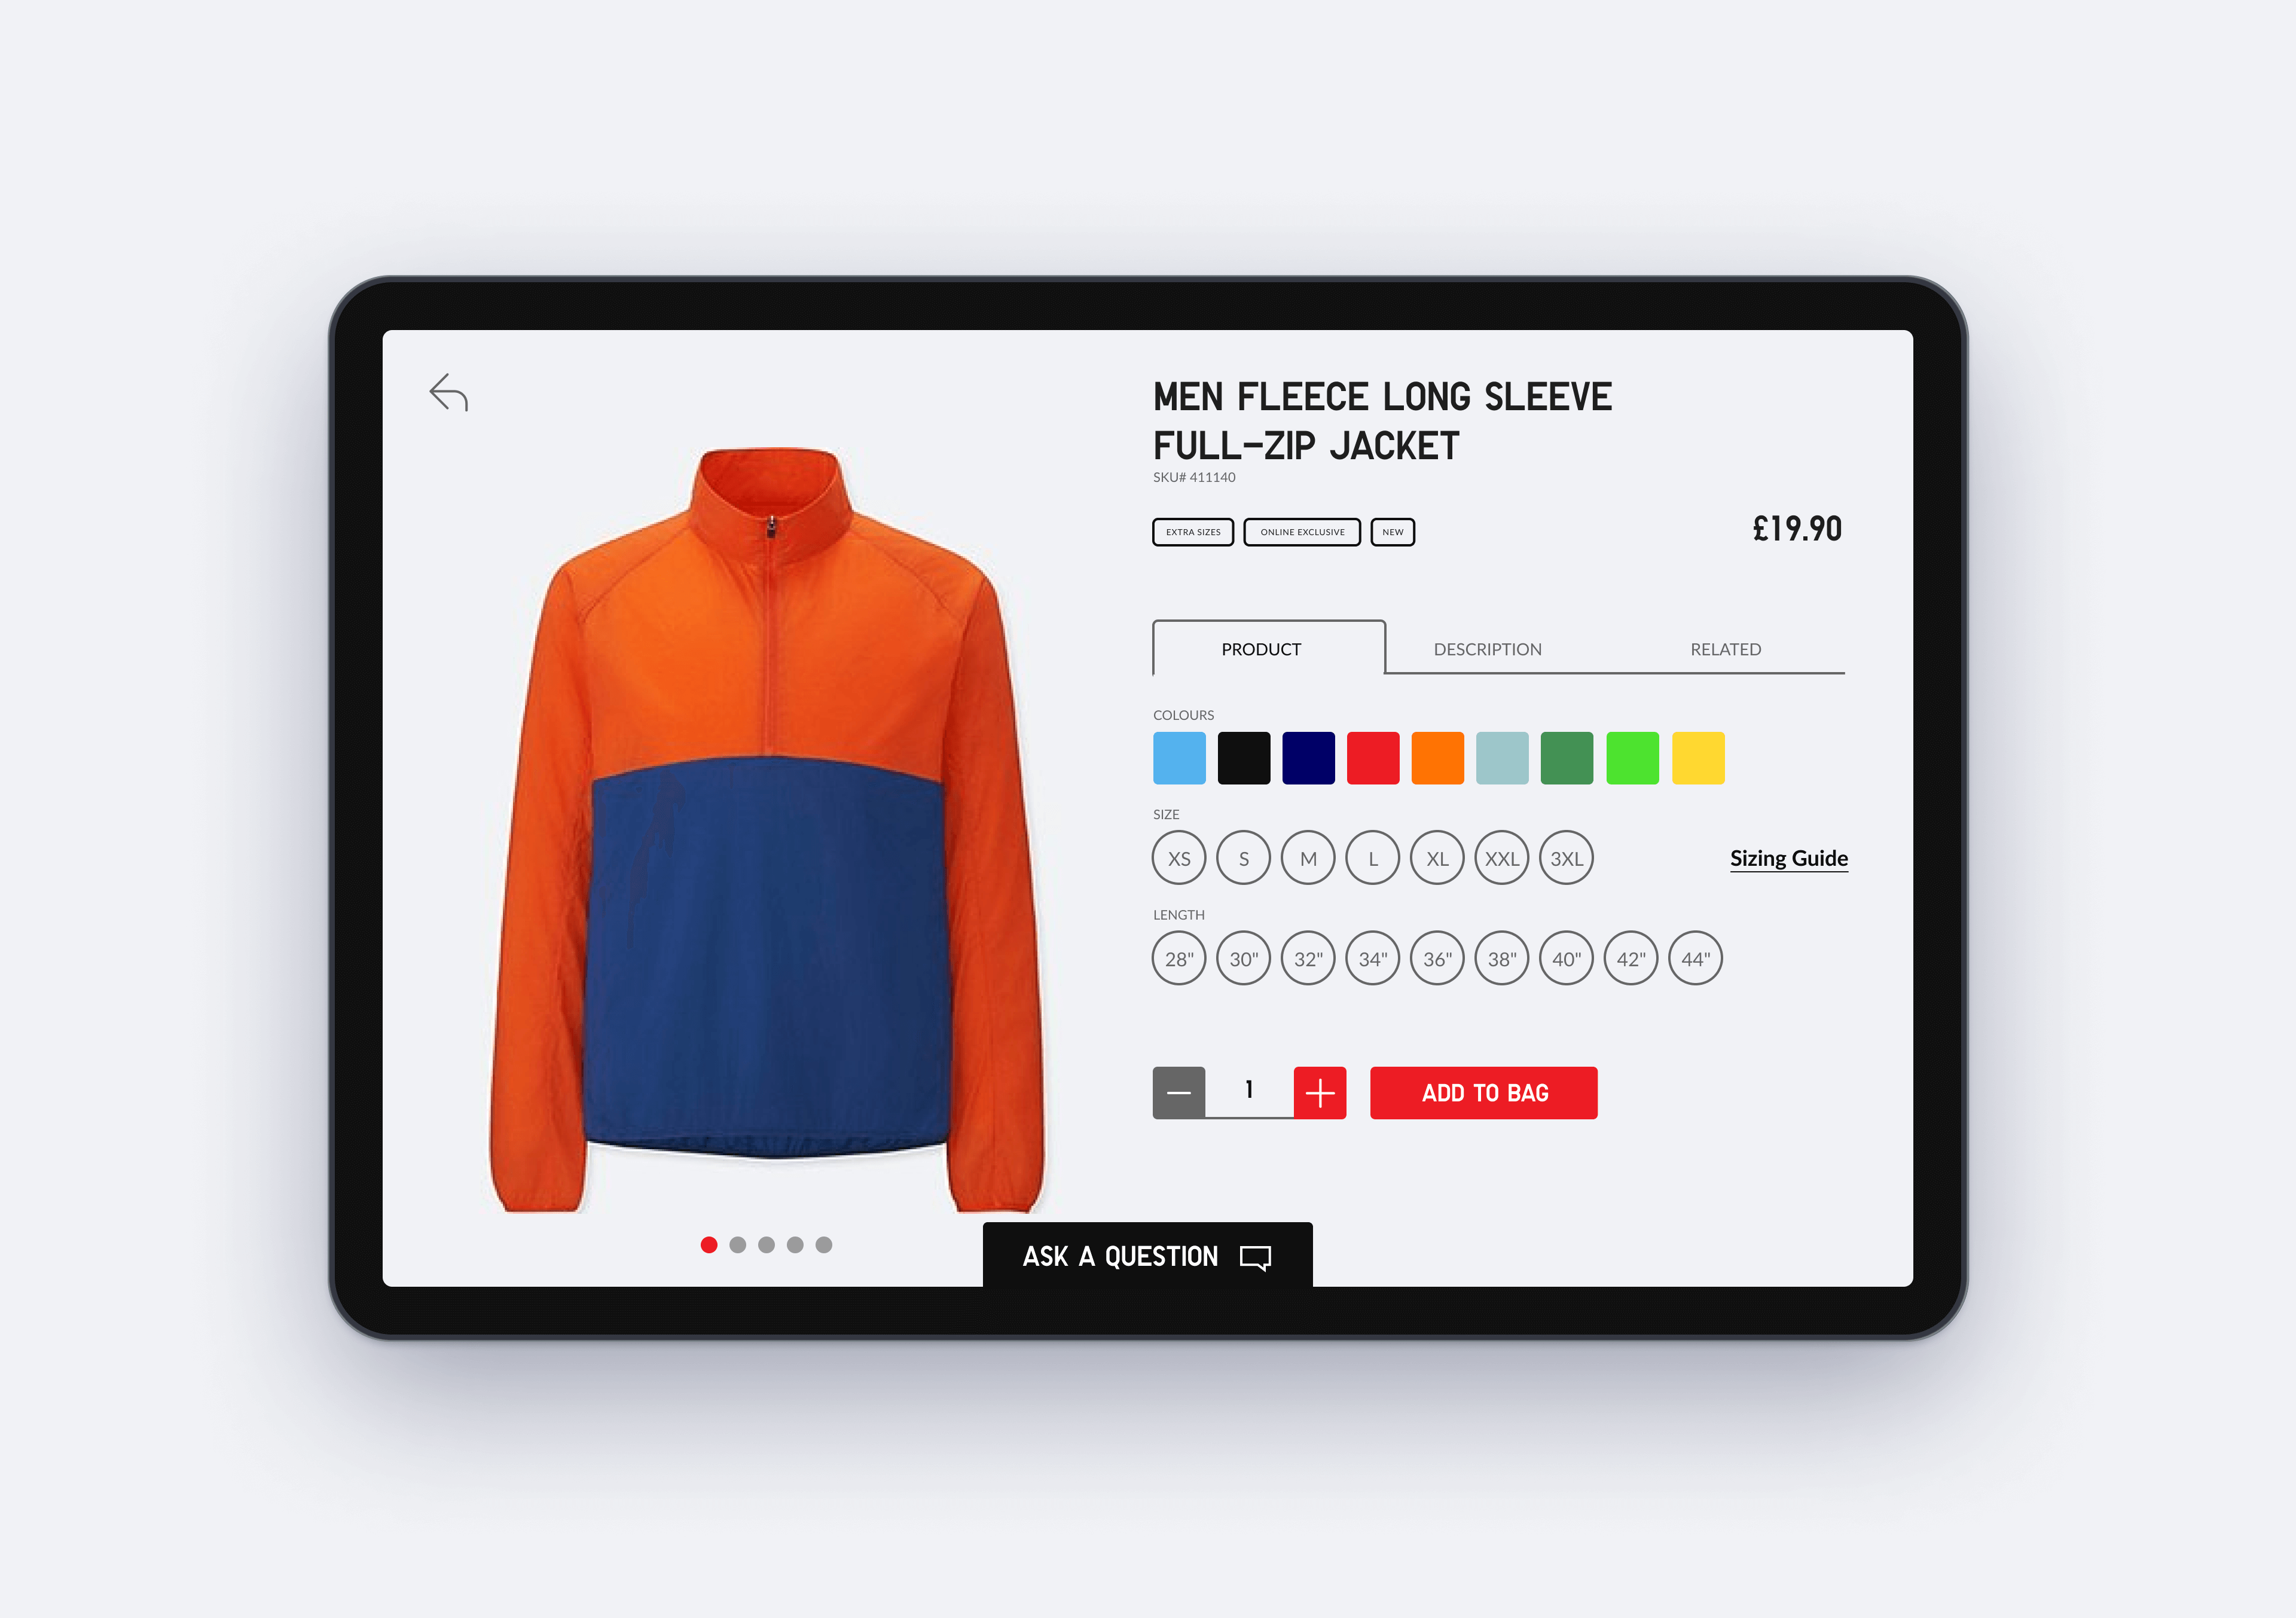 Product Display Page (PDP) design for the in-store Uniqlo kiosk device